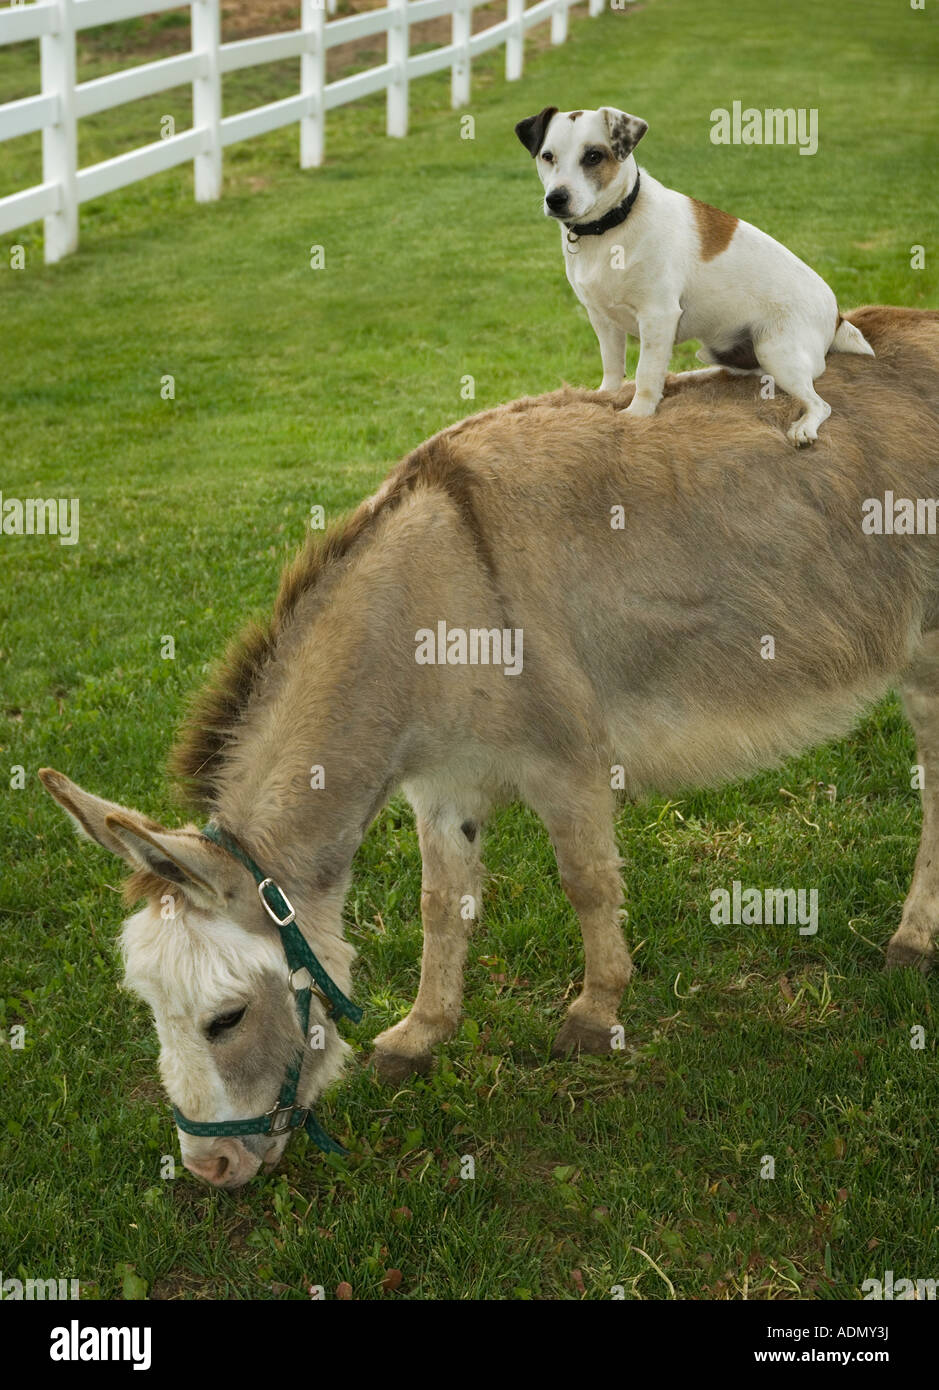 Jack Russel Terrior dog riding on the back of a donkey Stock Photo